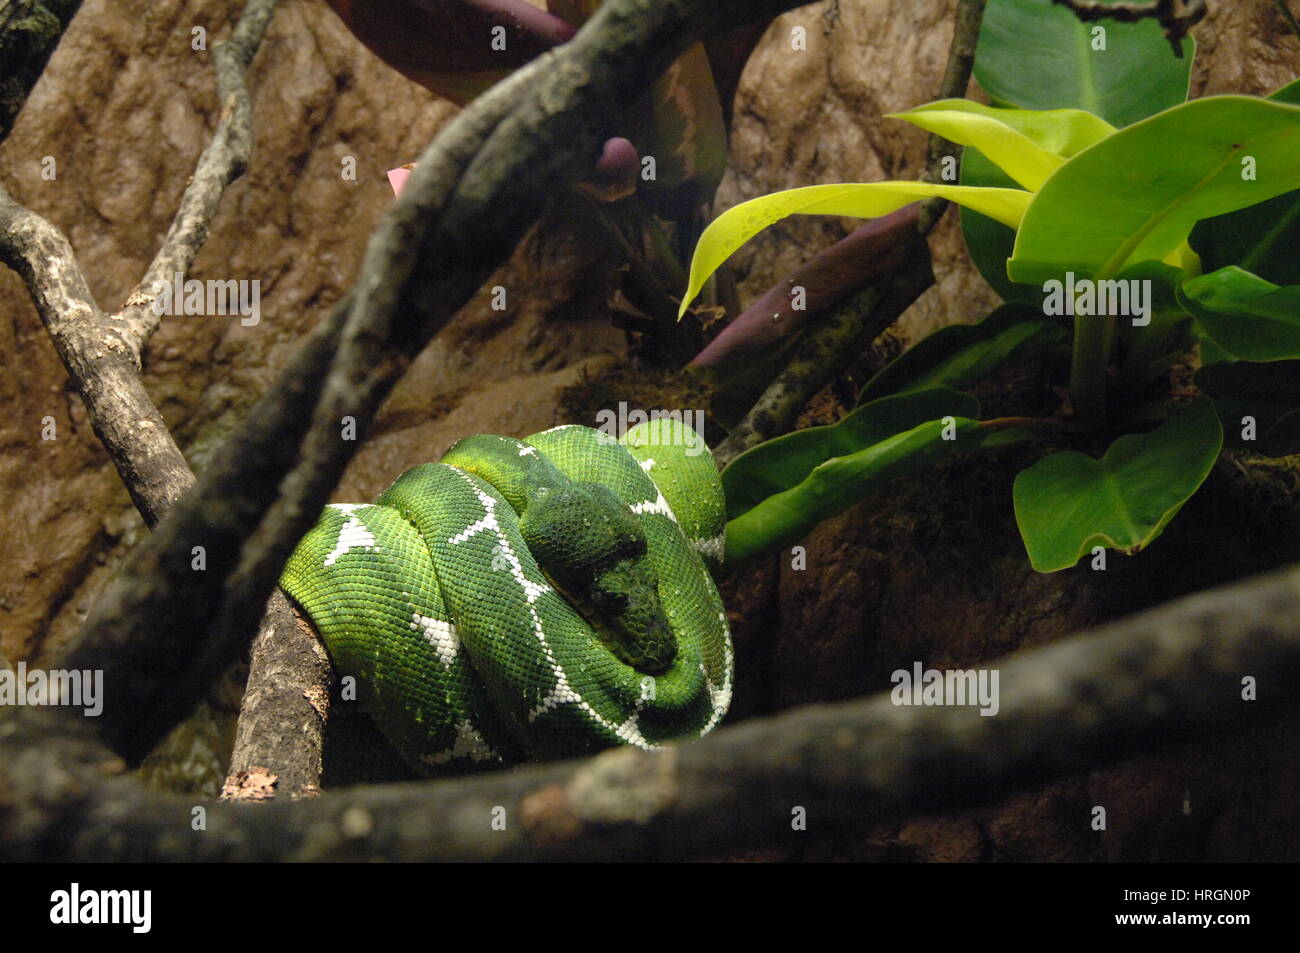 Horizontal image of green snake, reptile, wrapped around tree branch at the Bronx Zoo in New York City Stock Photo